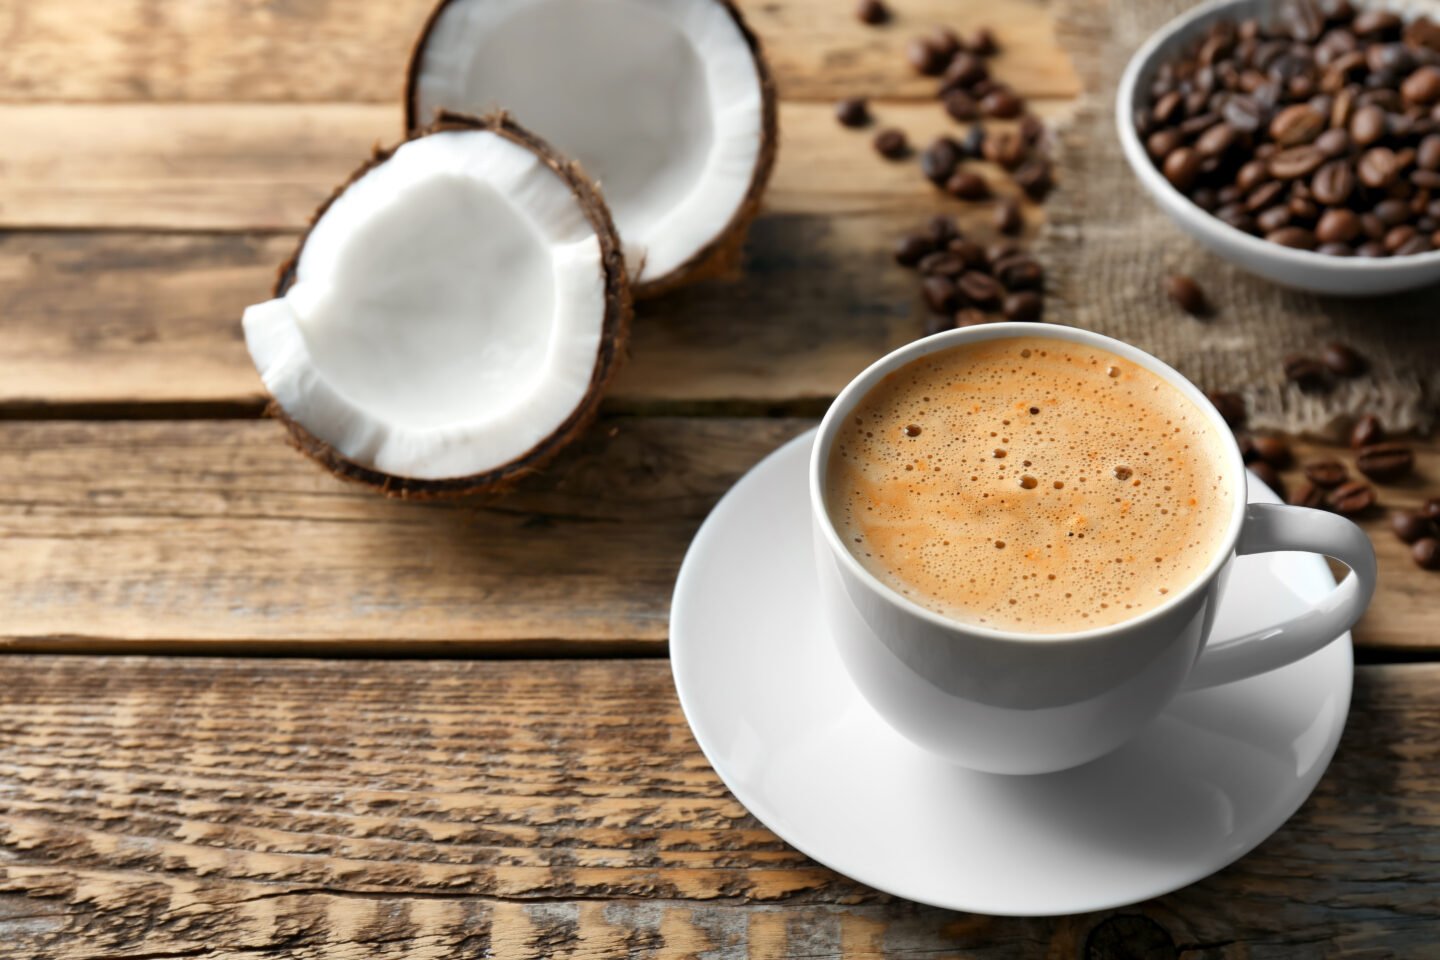 Cup,Of,Tasty,Coconut,Coffee,And,Beans,On,Wooden,Table